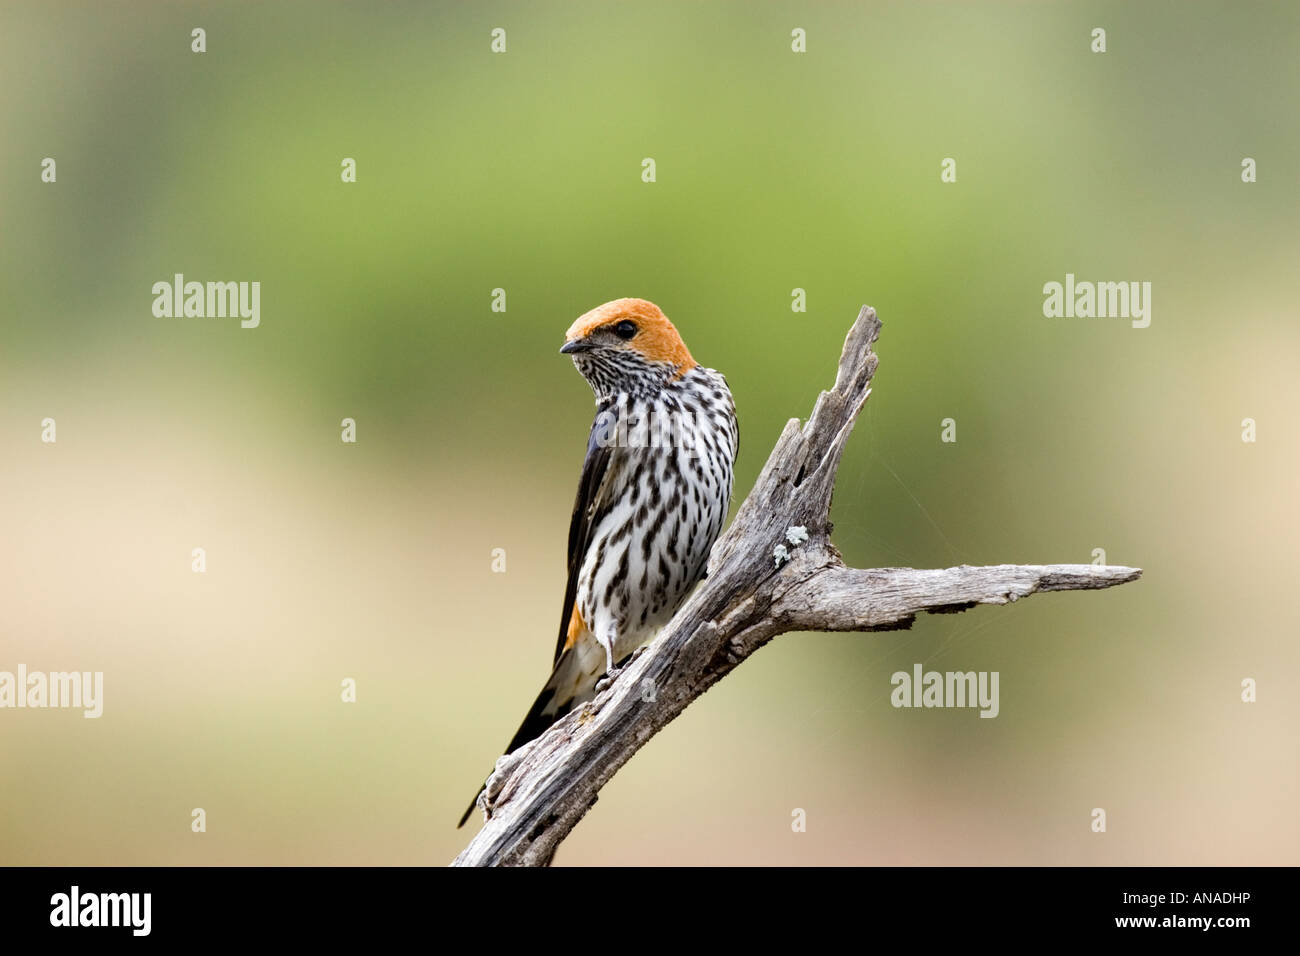 Lesser striped swallow (hirundo abyssinica) perched on branch Stock Photo